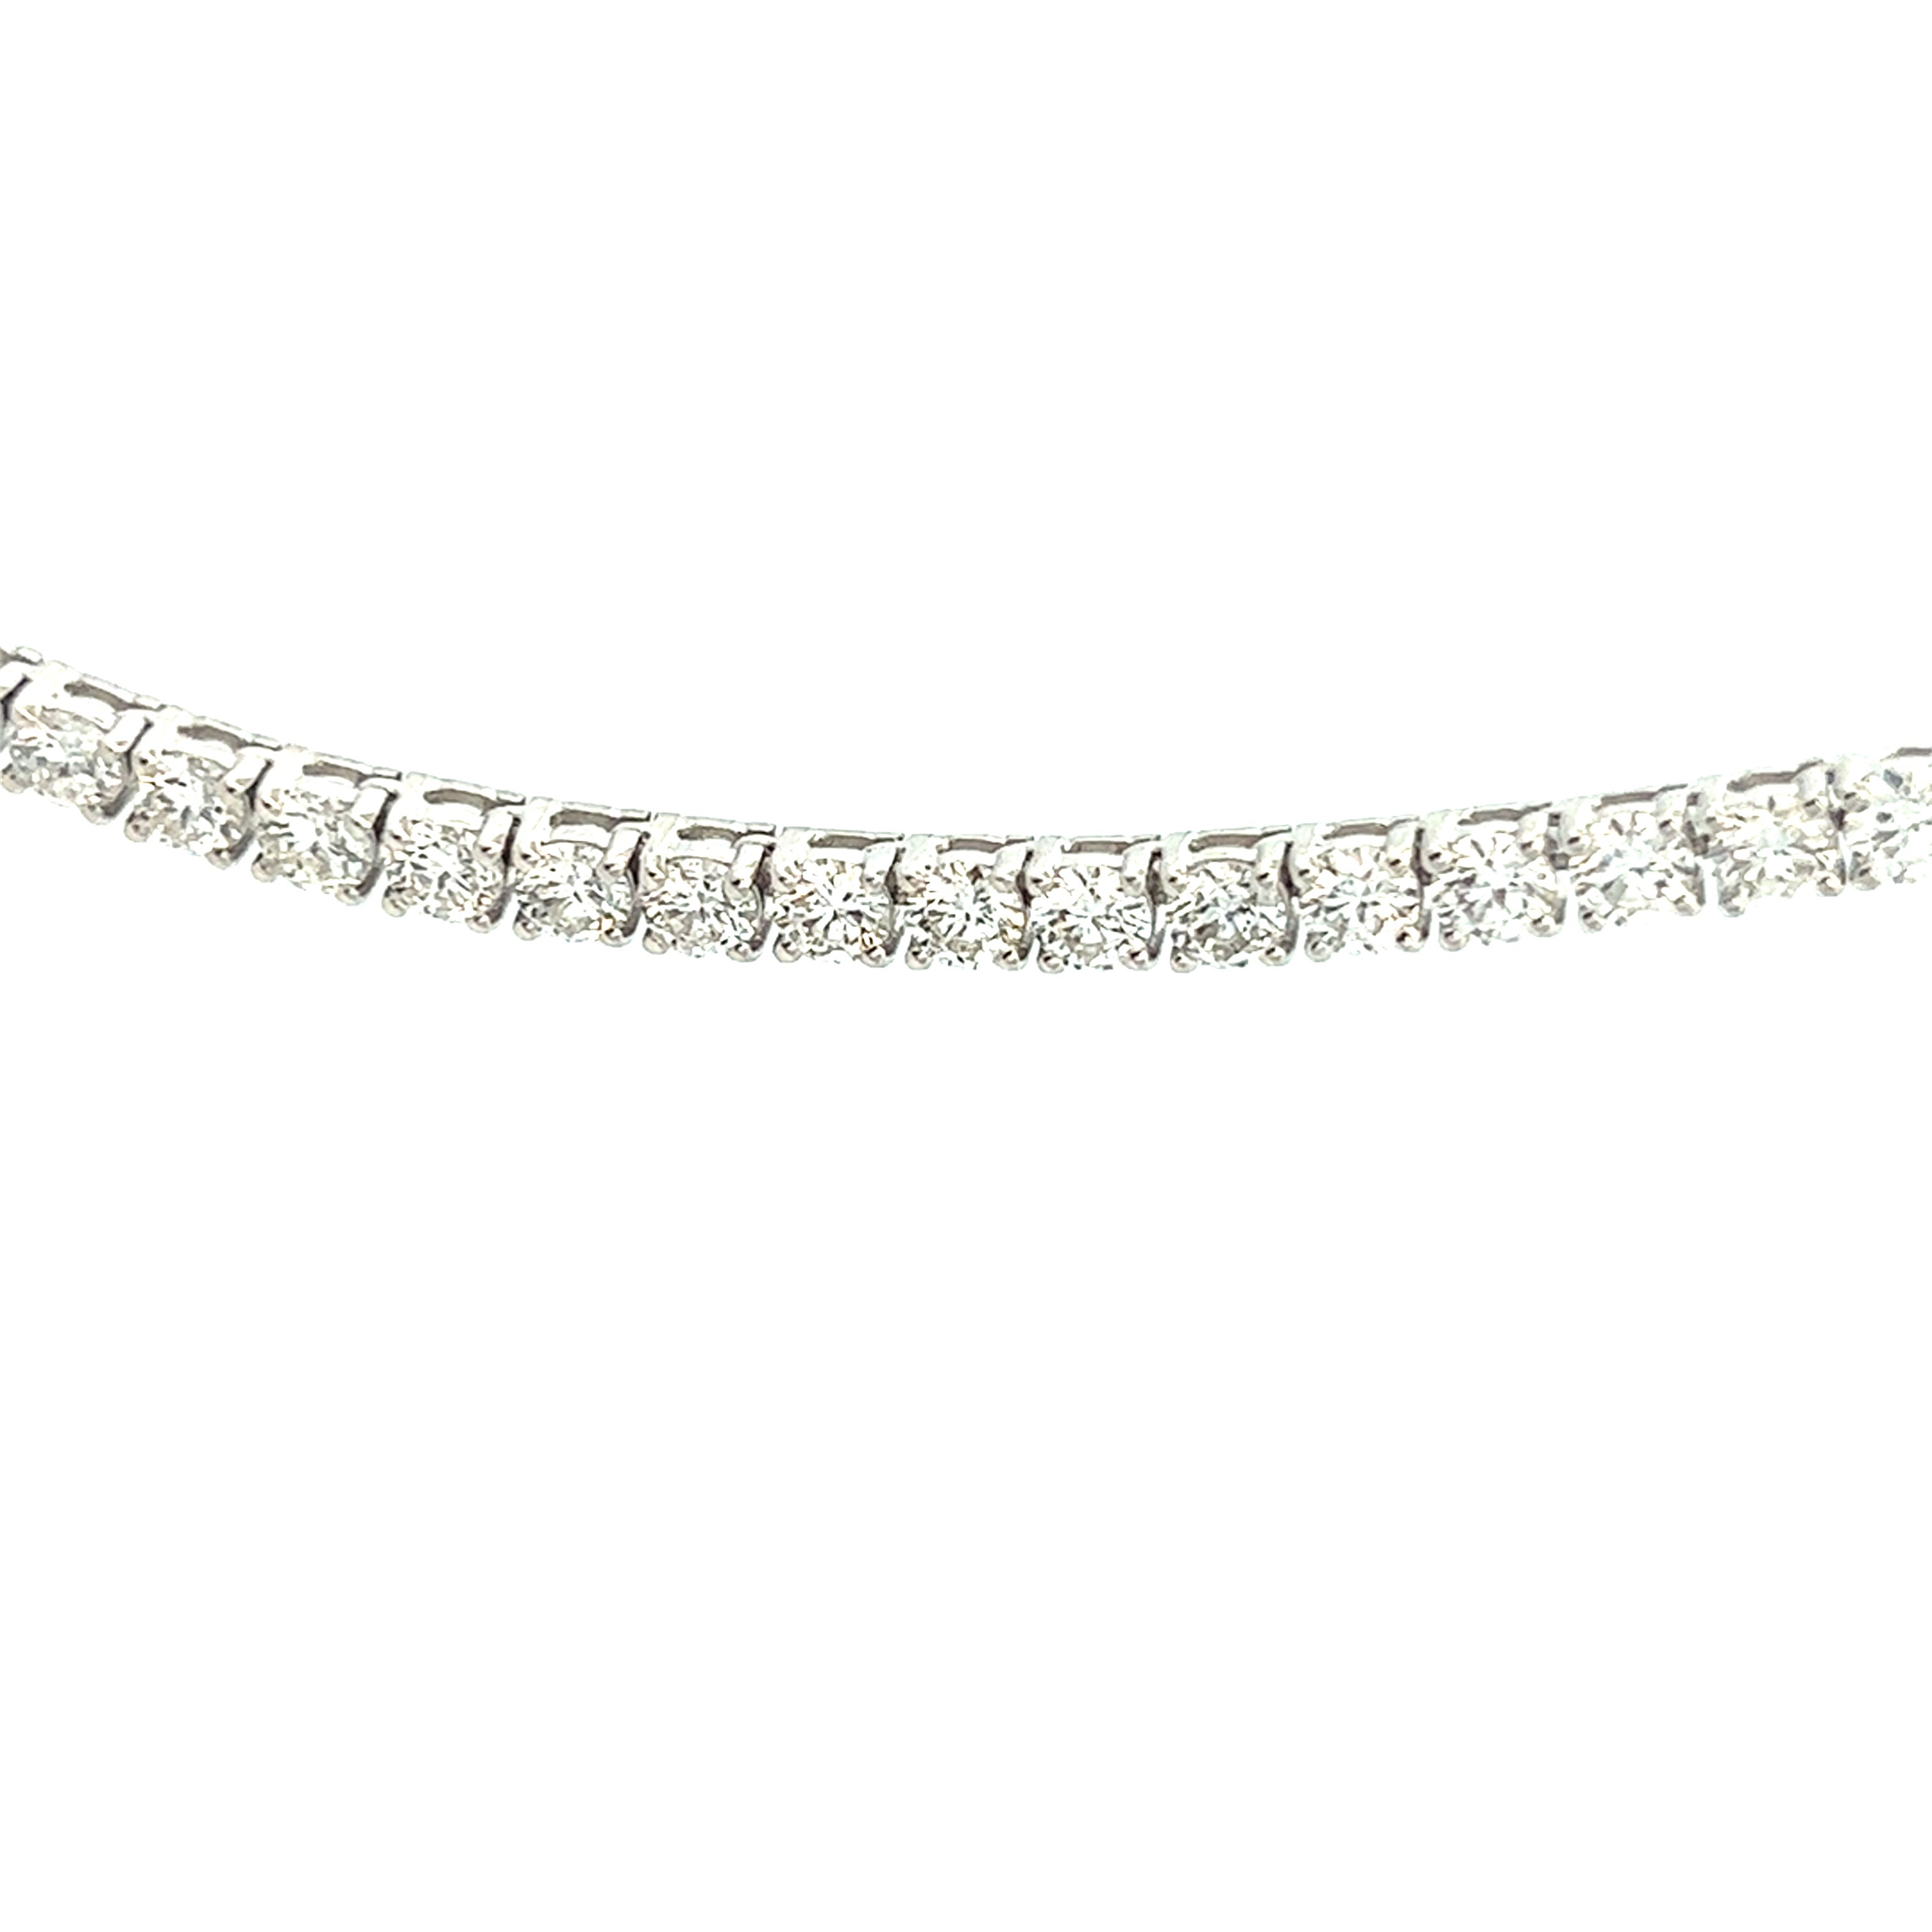 Real Diamonds Golden Bridal Diamond Necklace, Occasion: Wedding, Size: Neck  Size at Rs 1575000 in Mumbai